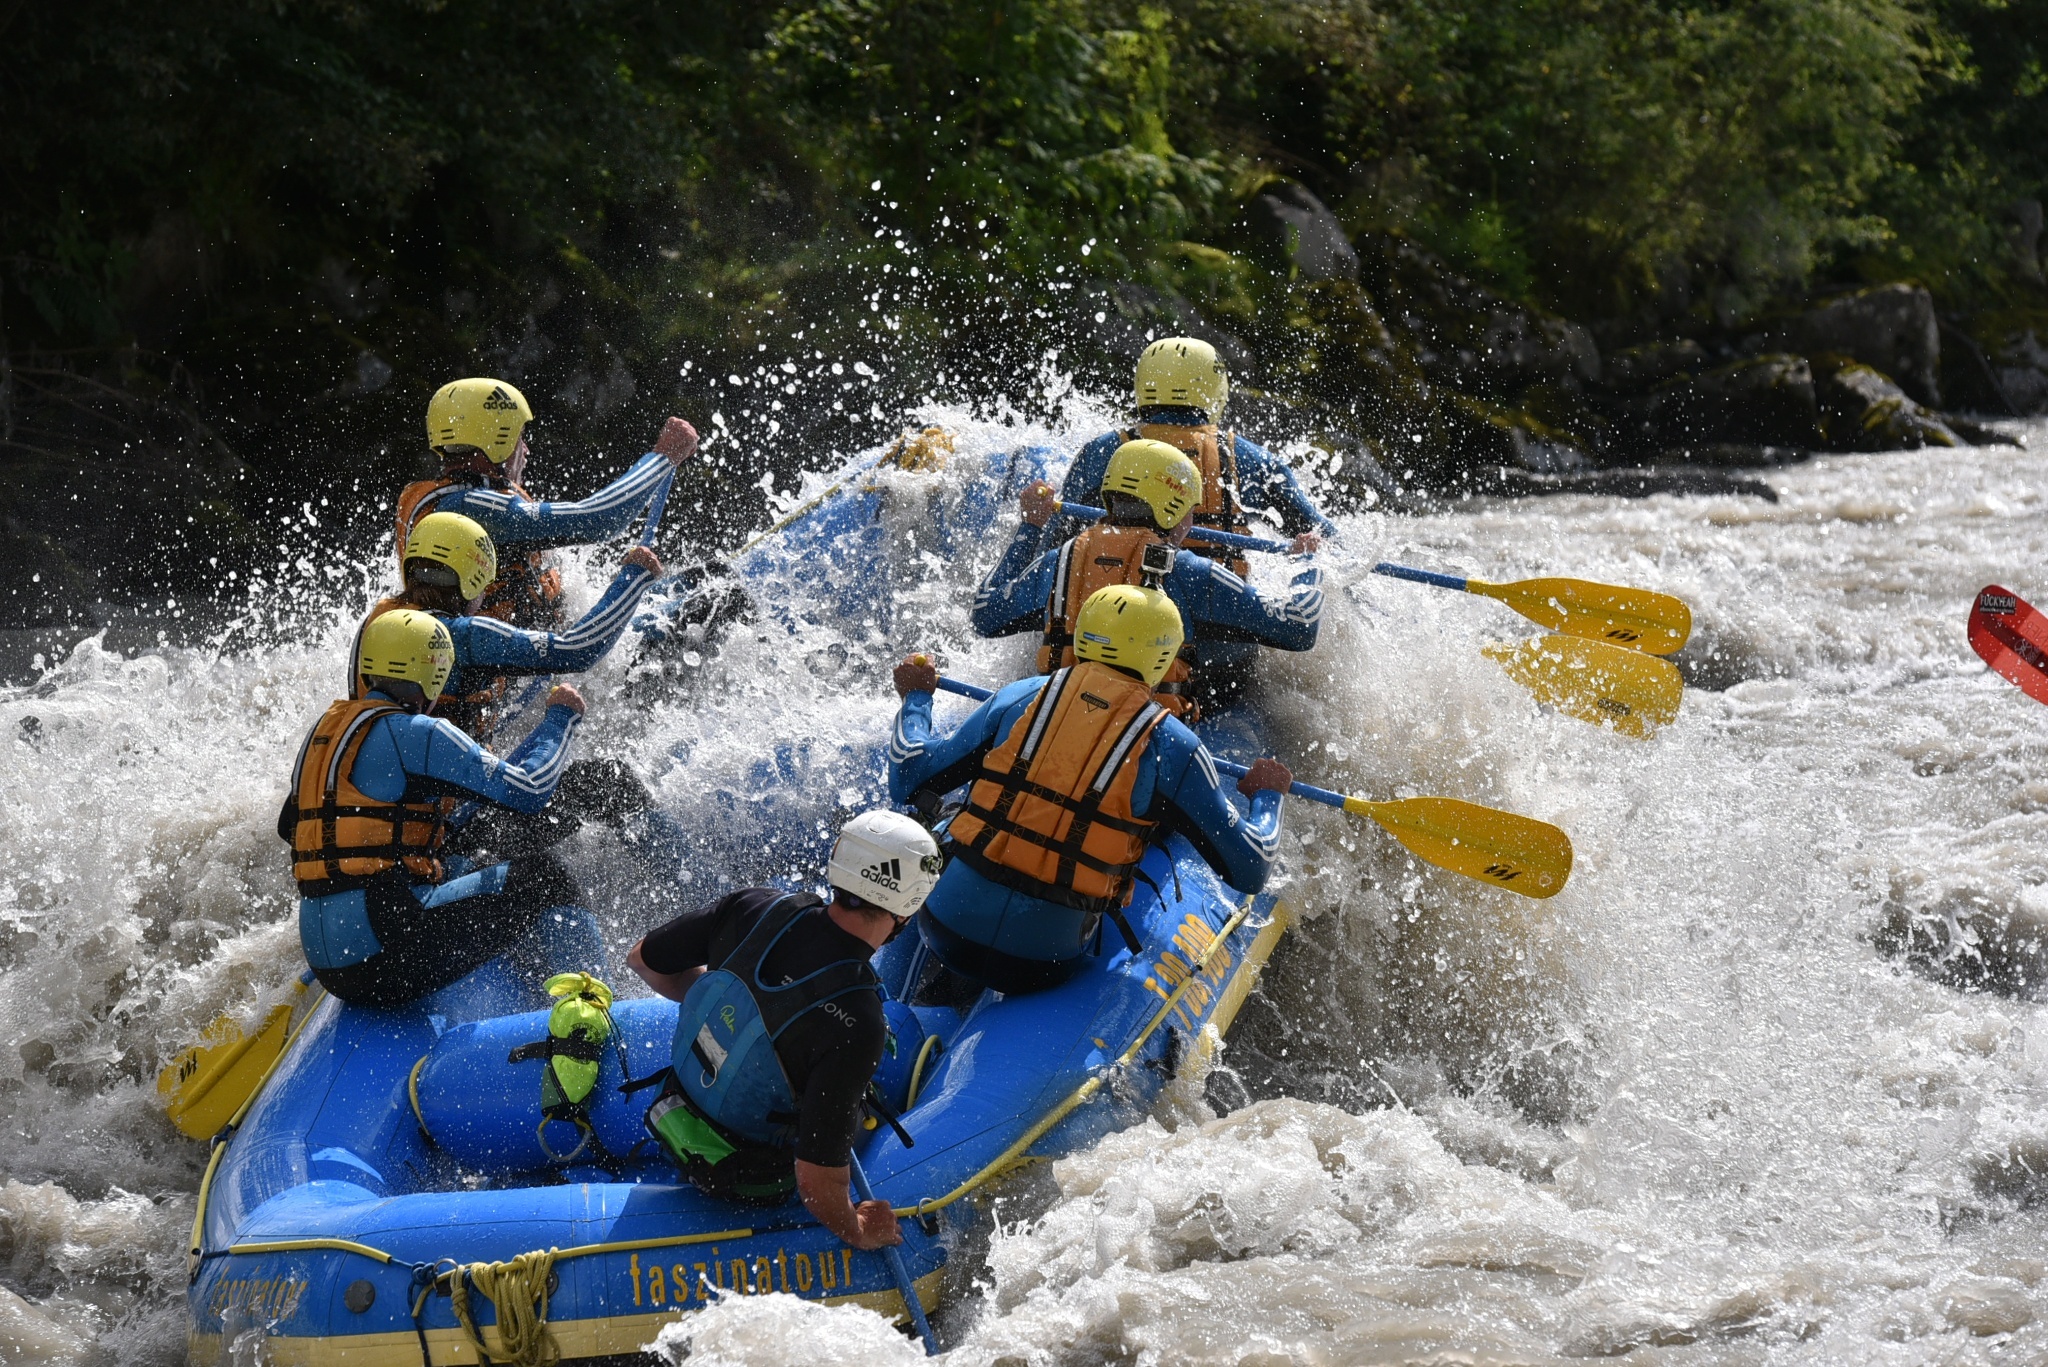 Rafting: Rafters move down a very intense river full of powerful rapids. 2050x1370 HD Wallpaper.